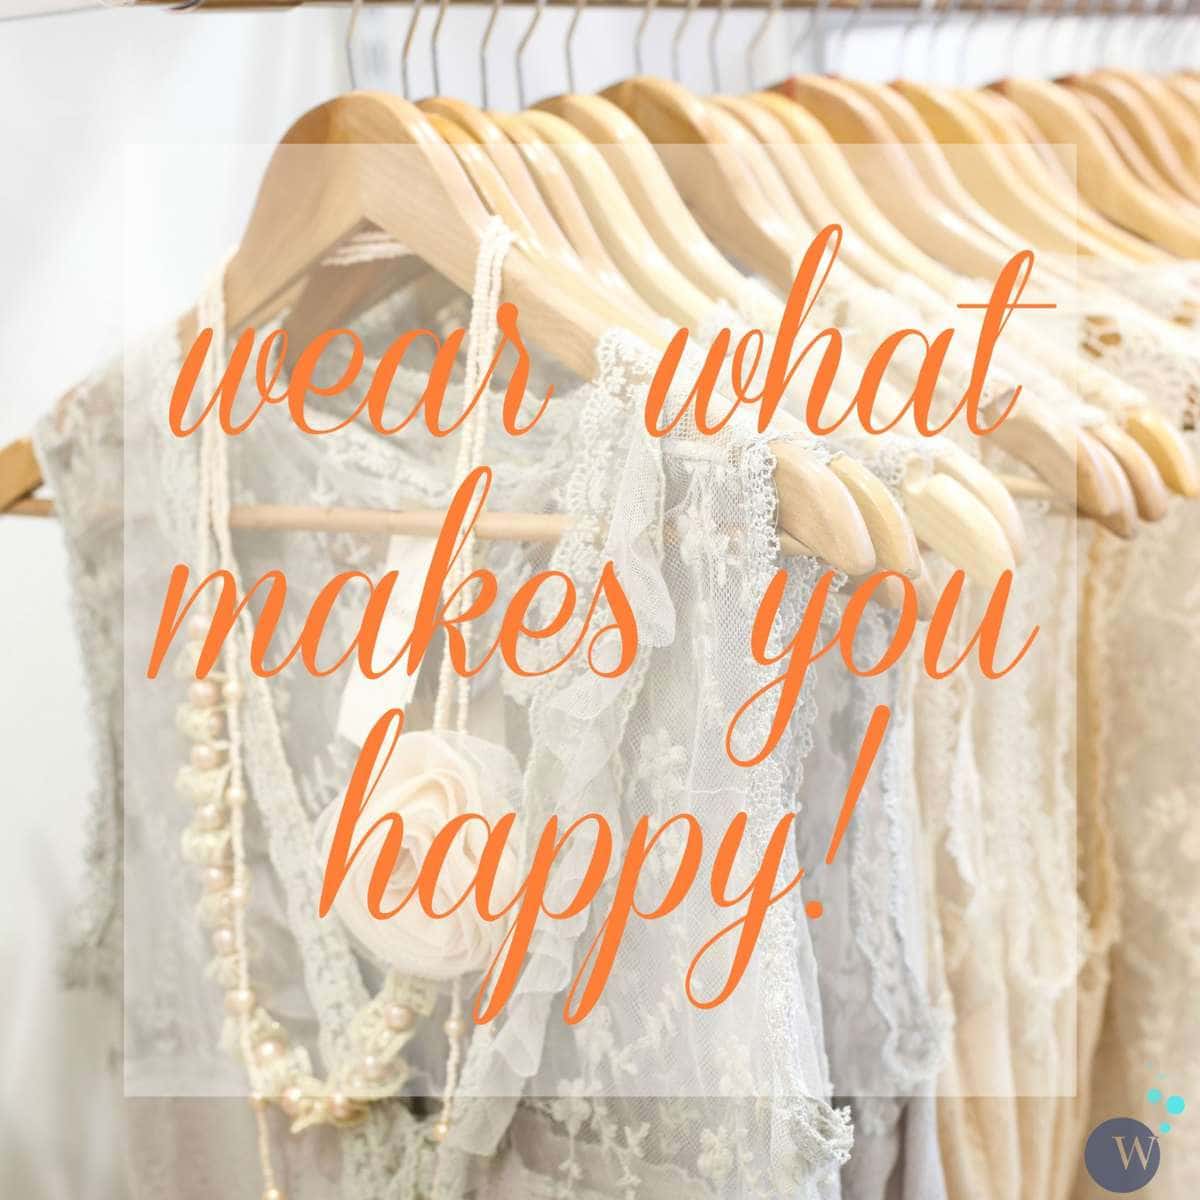 Wear What Makes You Happy: Discussing clothing to flatter the figure or flatter the soul via Wardrobe Oxygen